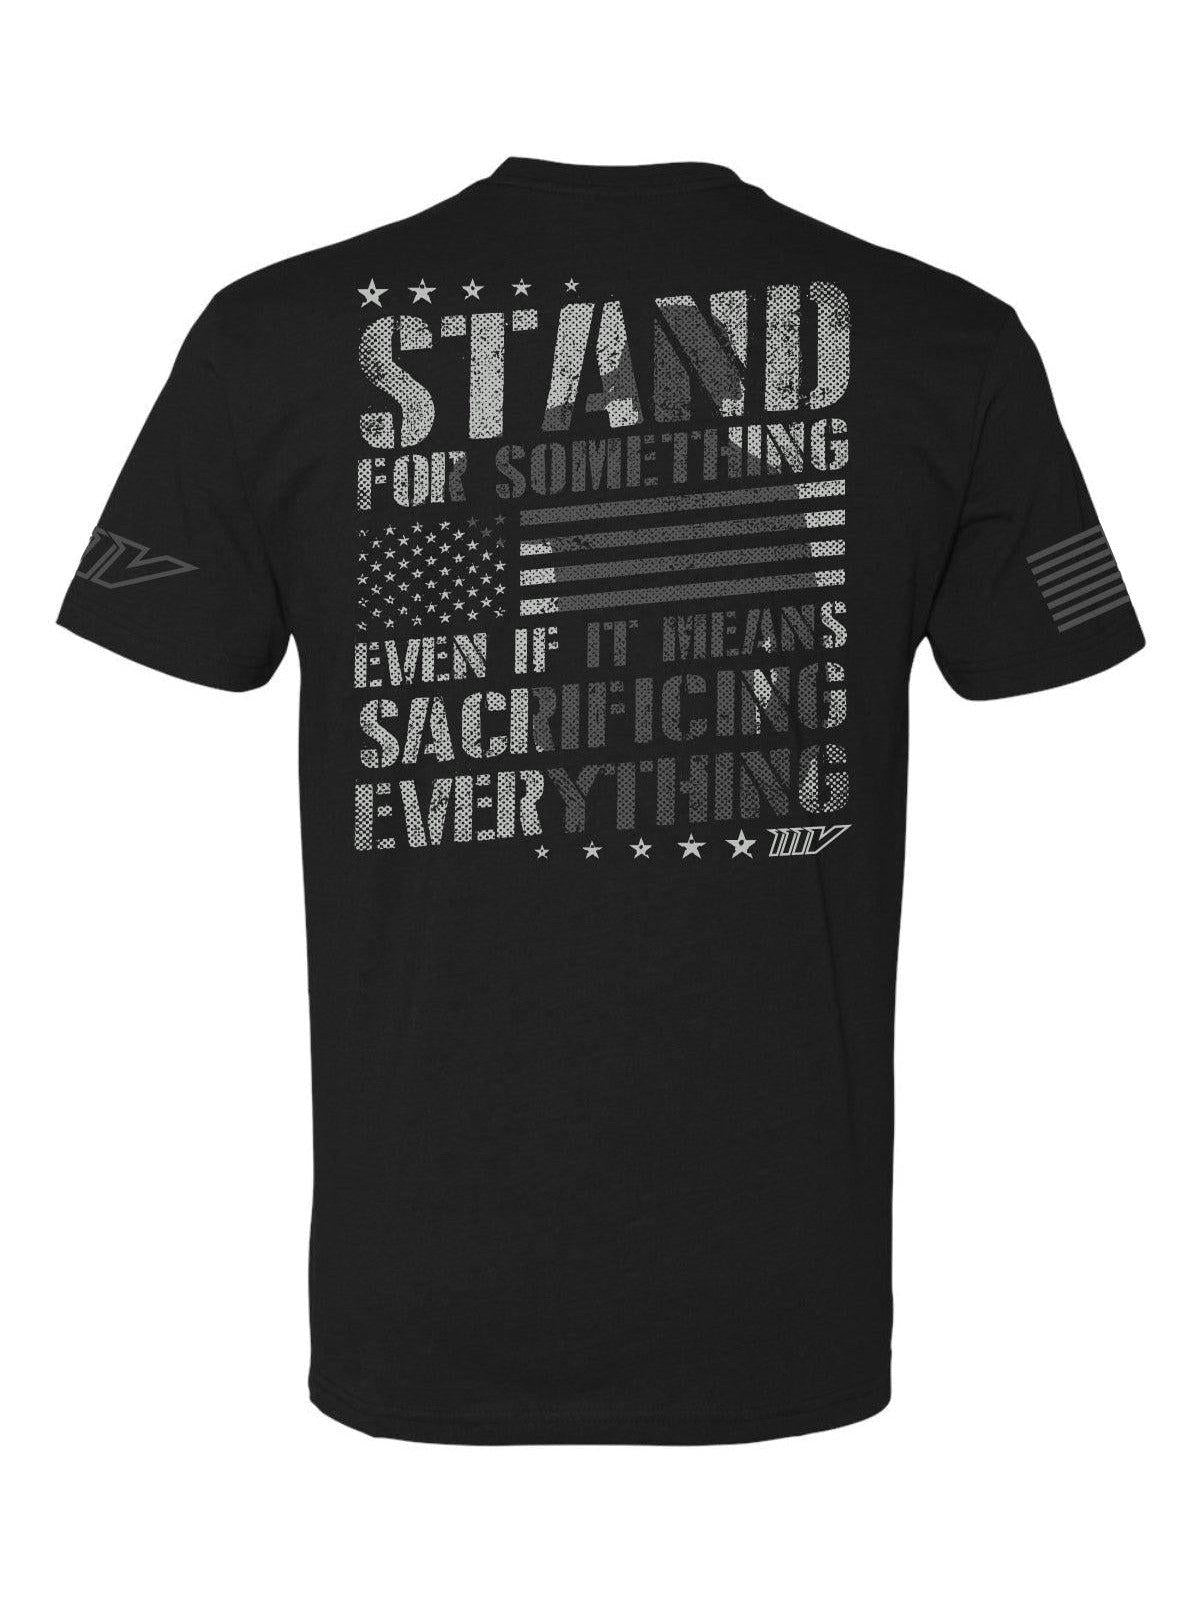 Stand for Something Tee